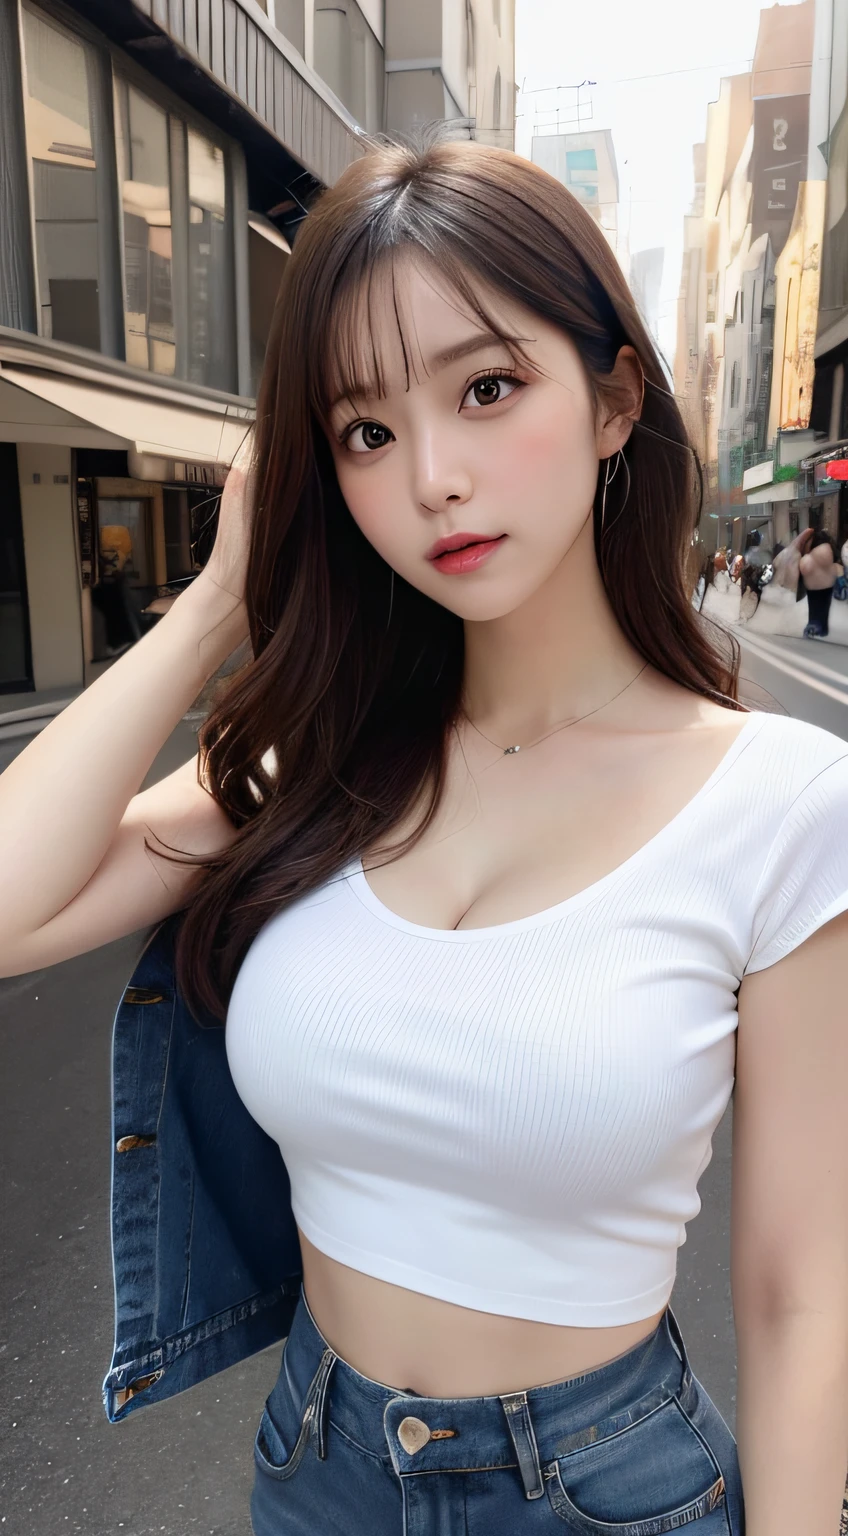 masutepiece, Best Quality, Illustration, Ultra-detailed, finely detail, hight resolution, 8K Wallpaper, Perfect dynamic composition, Beautiful detailed eyes,  Natural Lip, white t-shirts , Short denim pants , Big breasts, cleavage, Full body, navel-baring